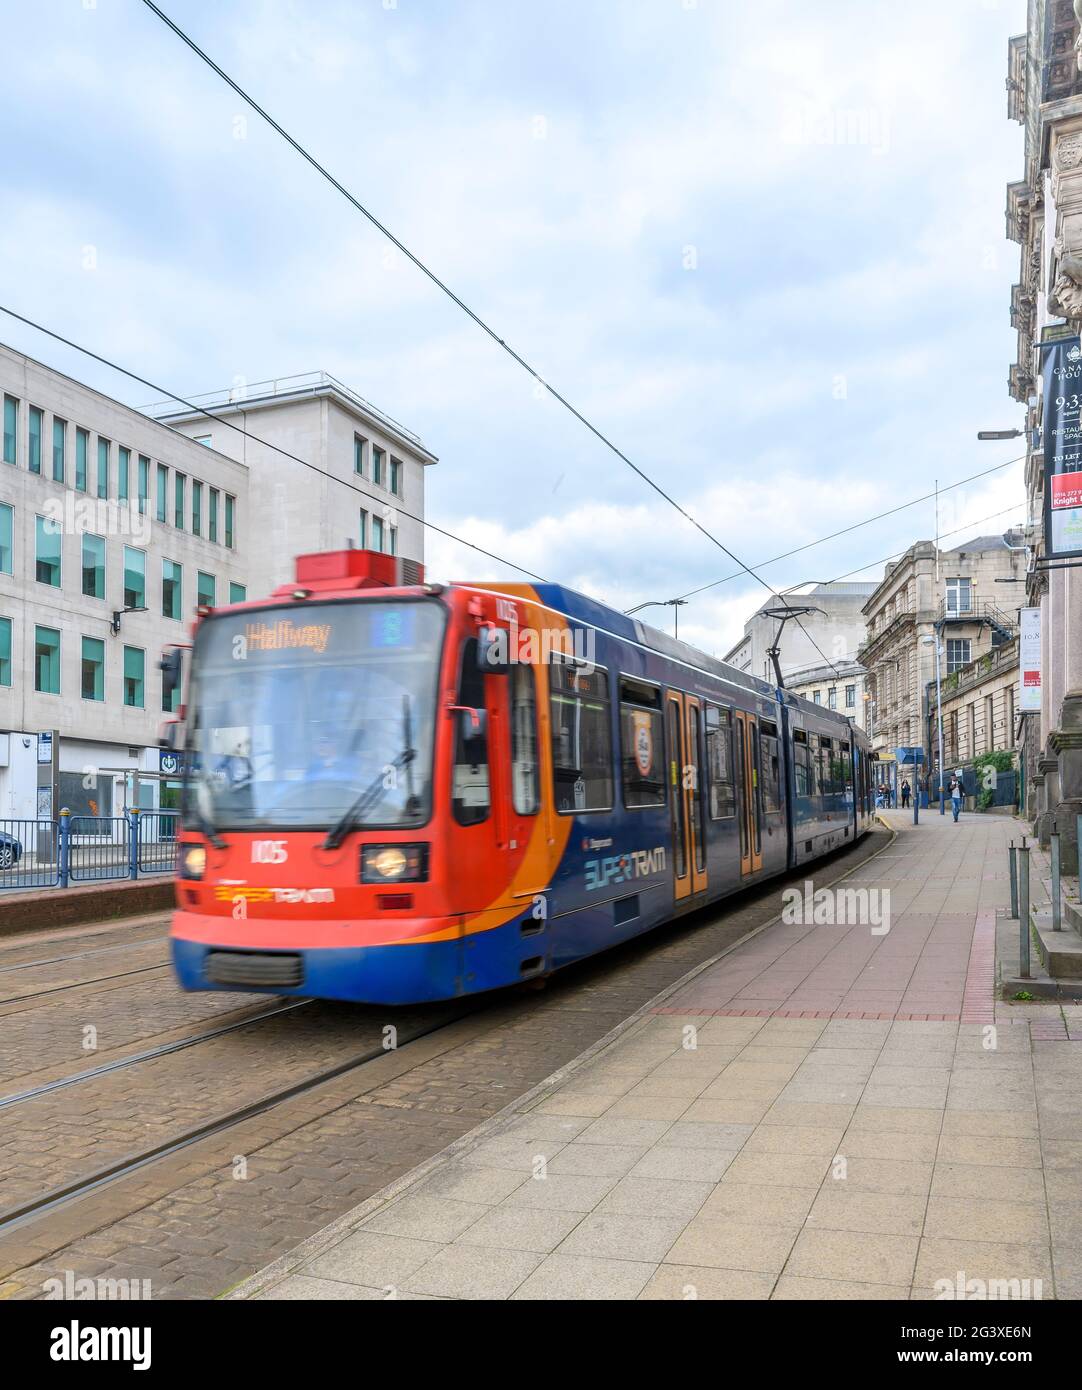 The modern tram service now runs past Park Hill estate in Sheffield built to replace Victorian slums. Urban Splash have brought Park Hill back to life Stock Photo